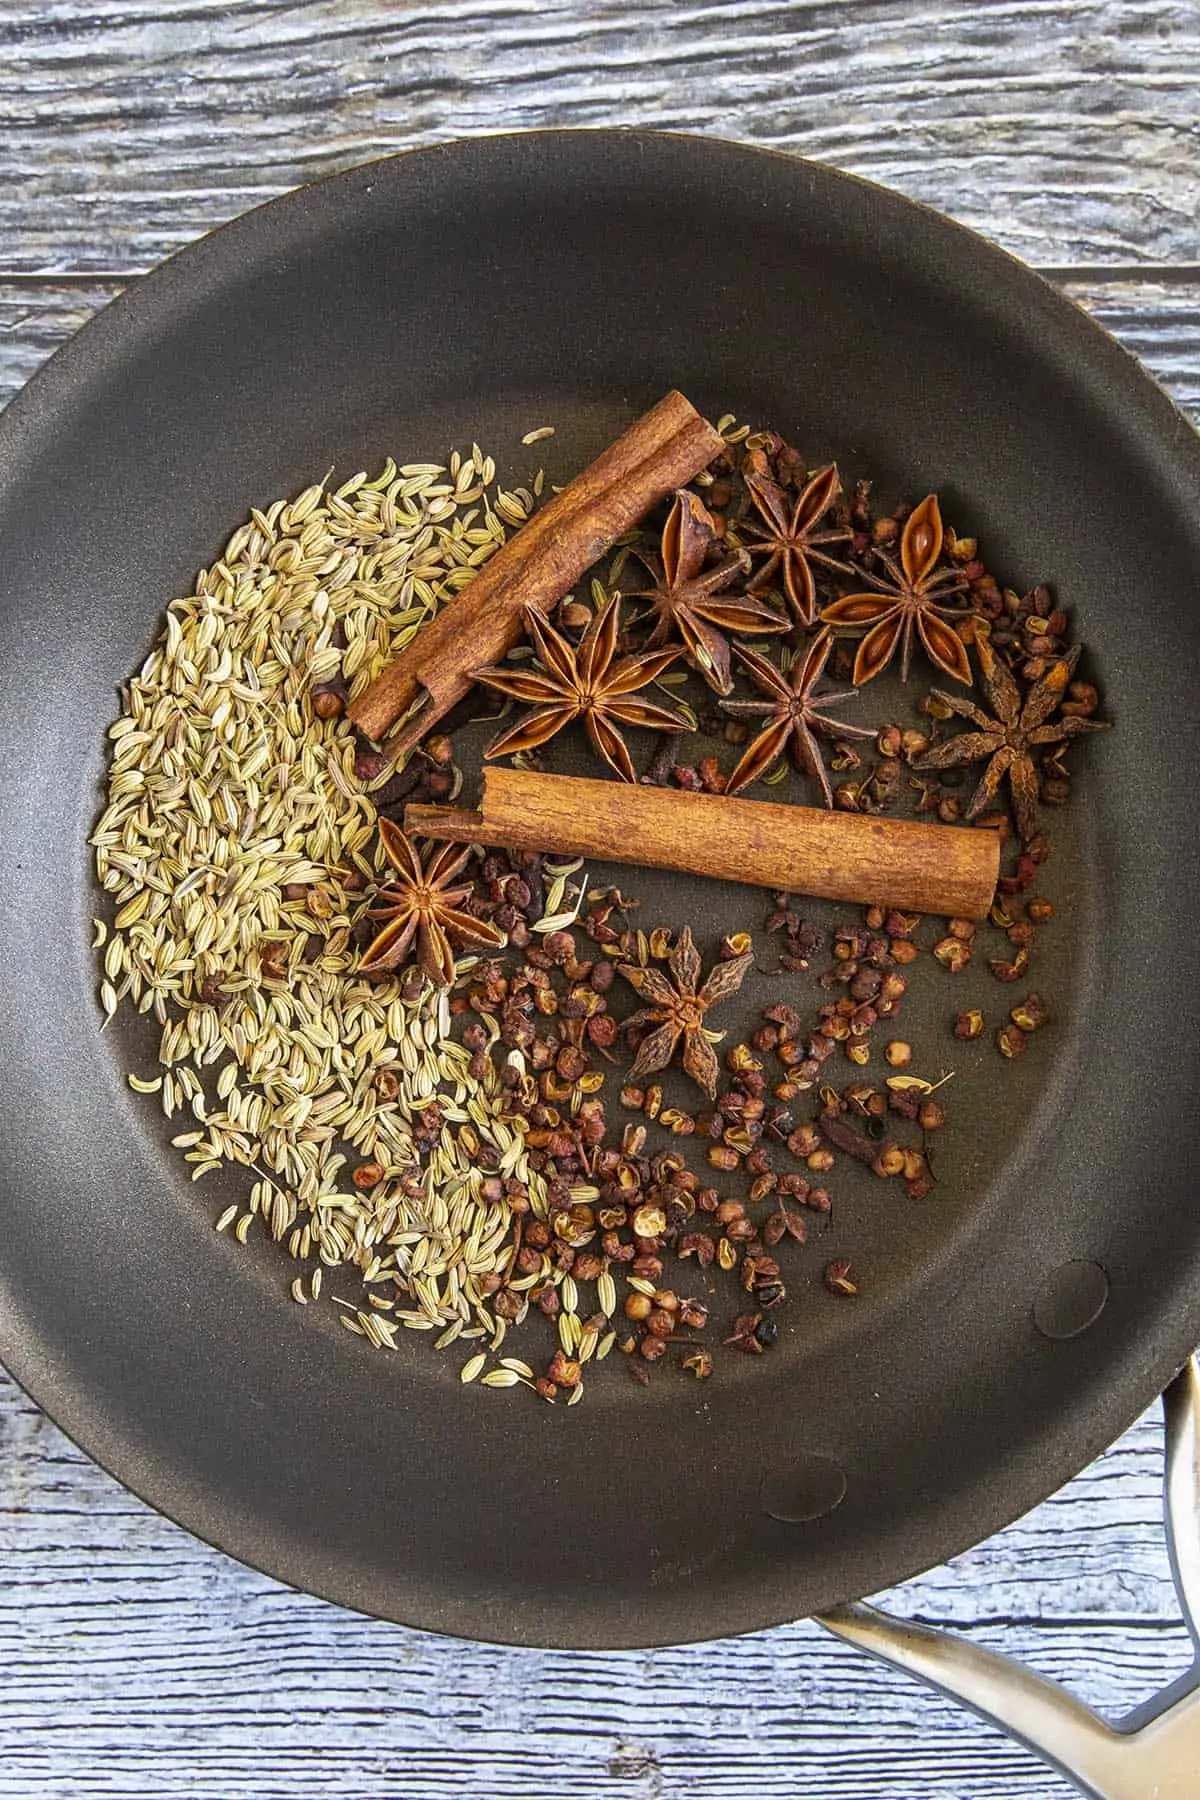 Toasting Chinese 5 Spice ingredients